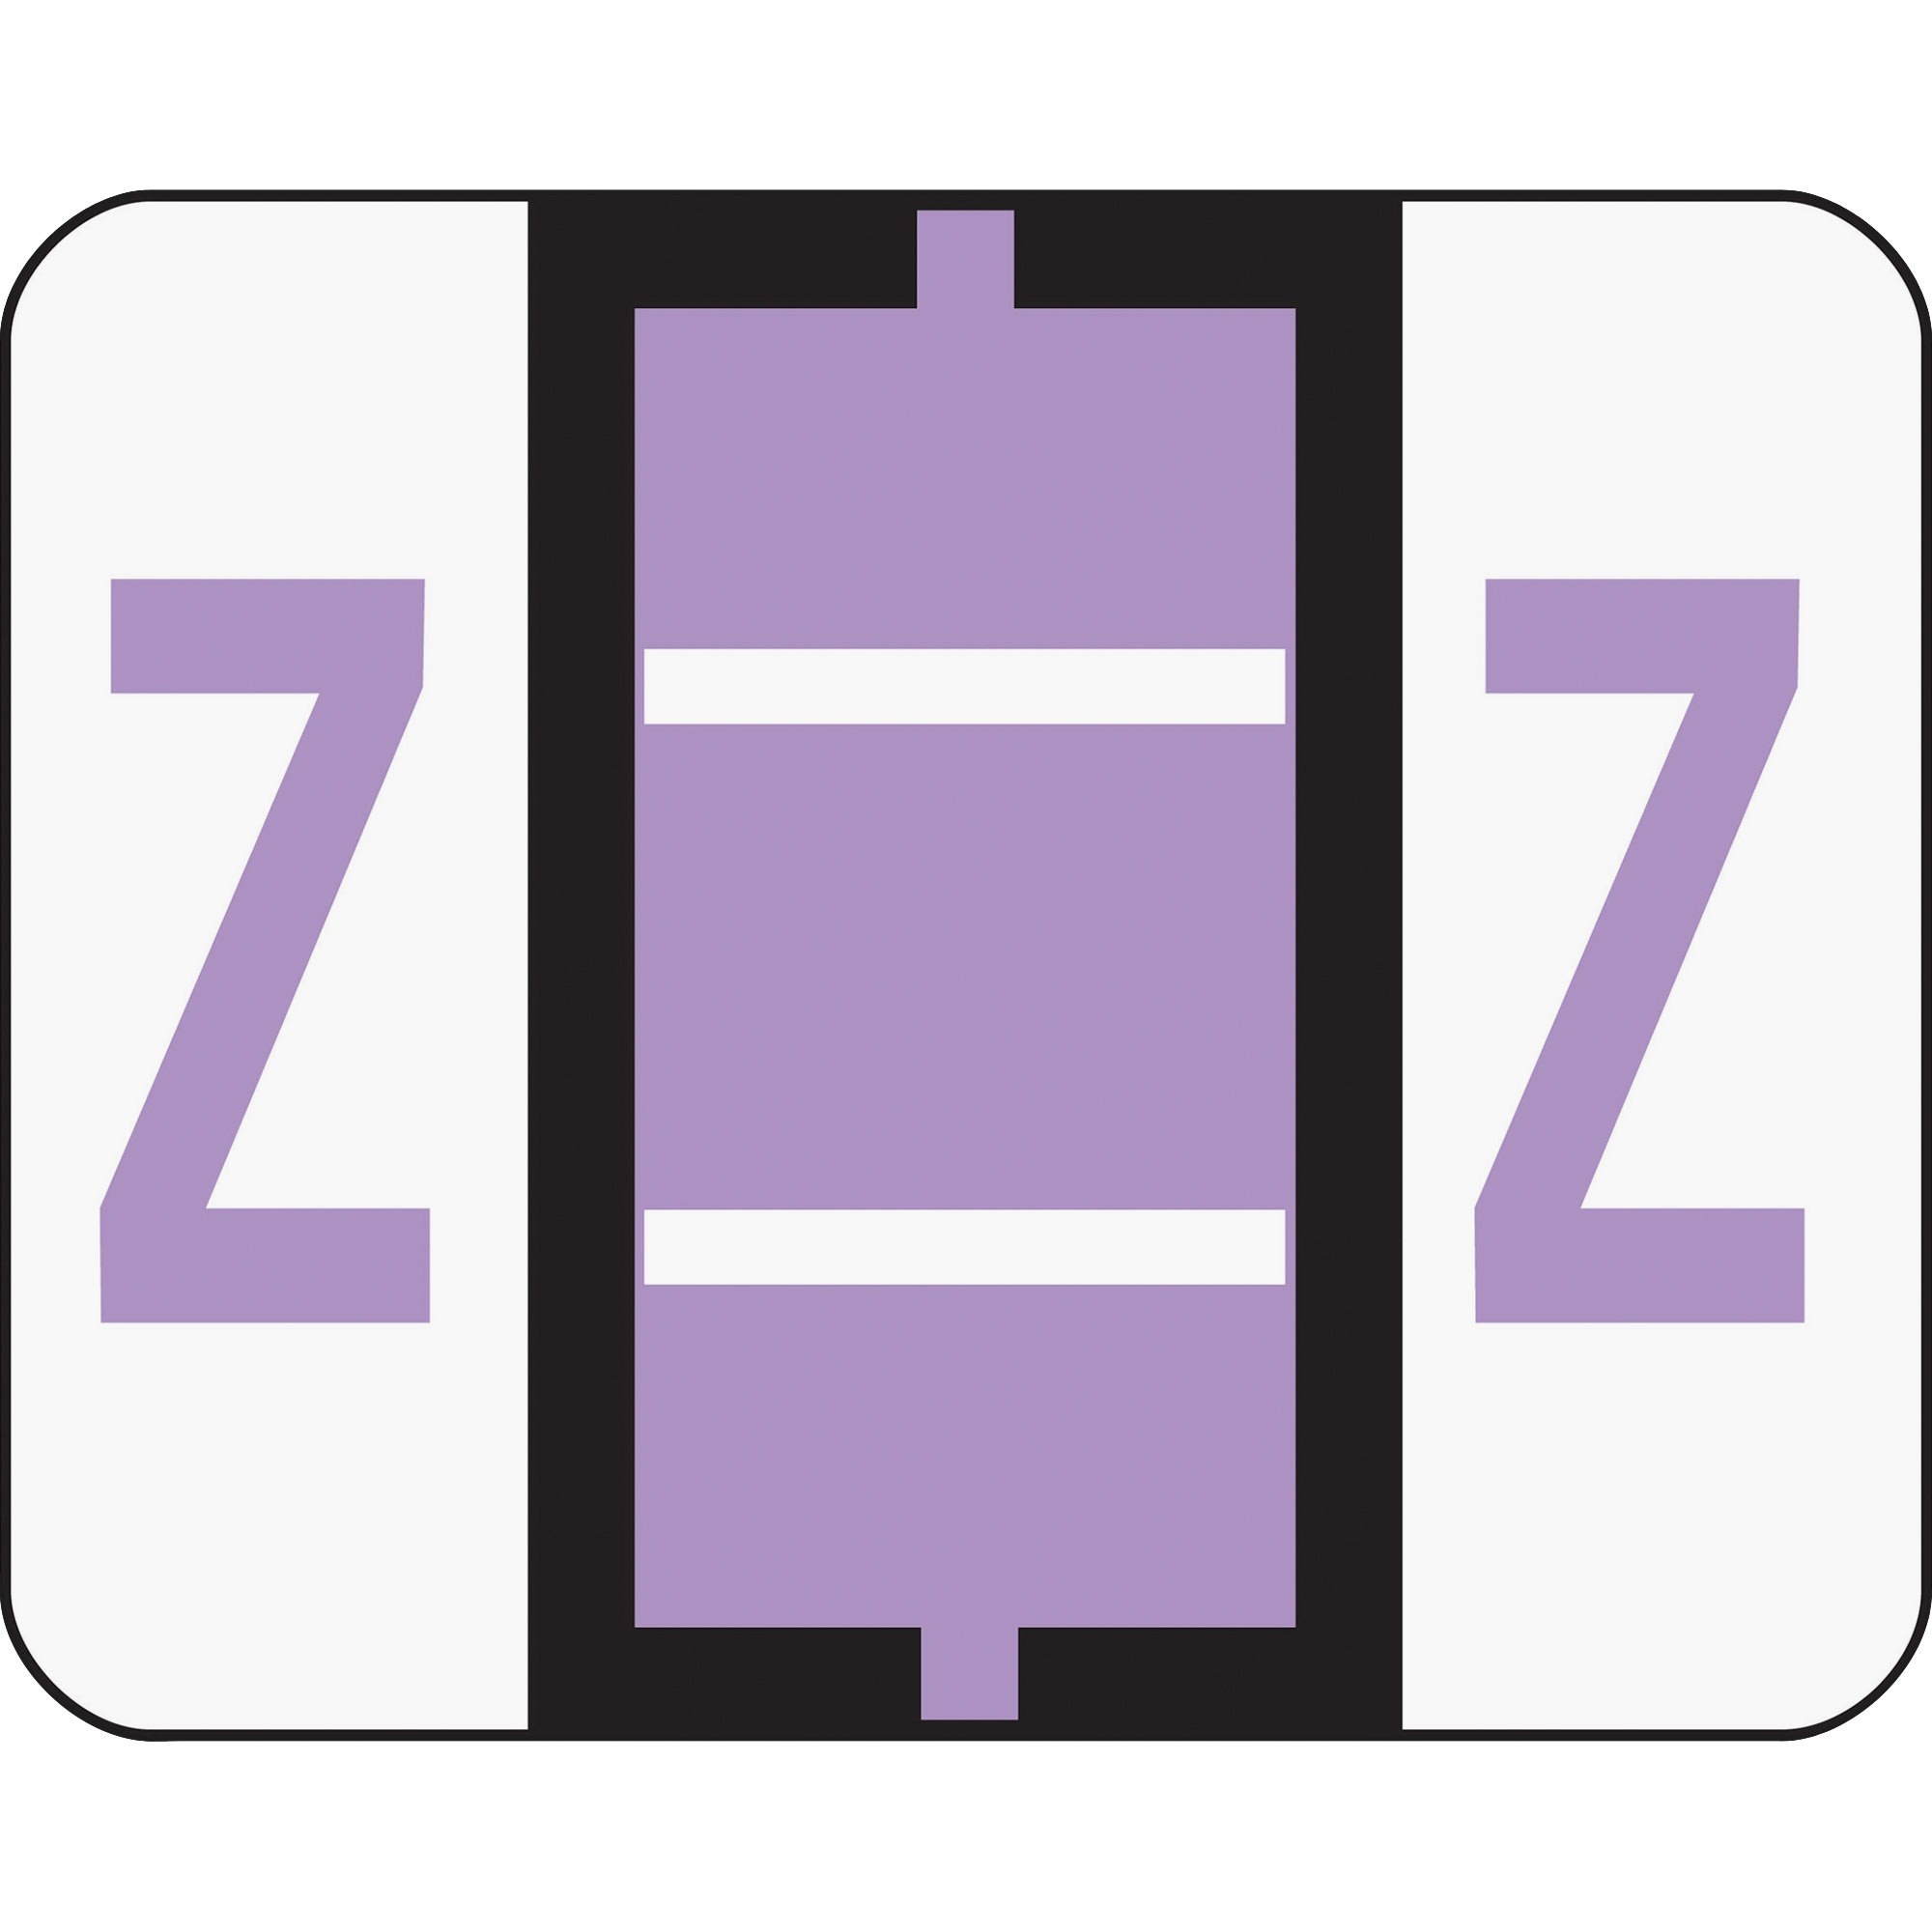 Smead 67096 A-Z Color-Coded Bar-Style End Tab Labels, Letter Z, Lavender, 500/Roll - image 3 of 3